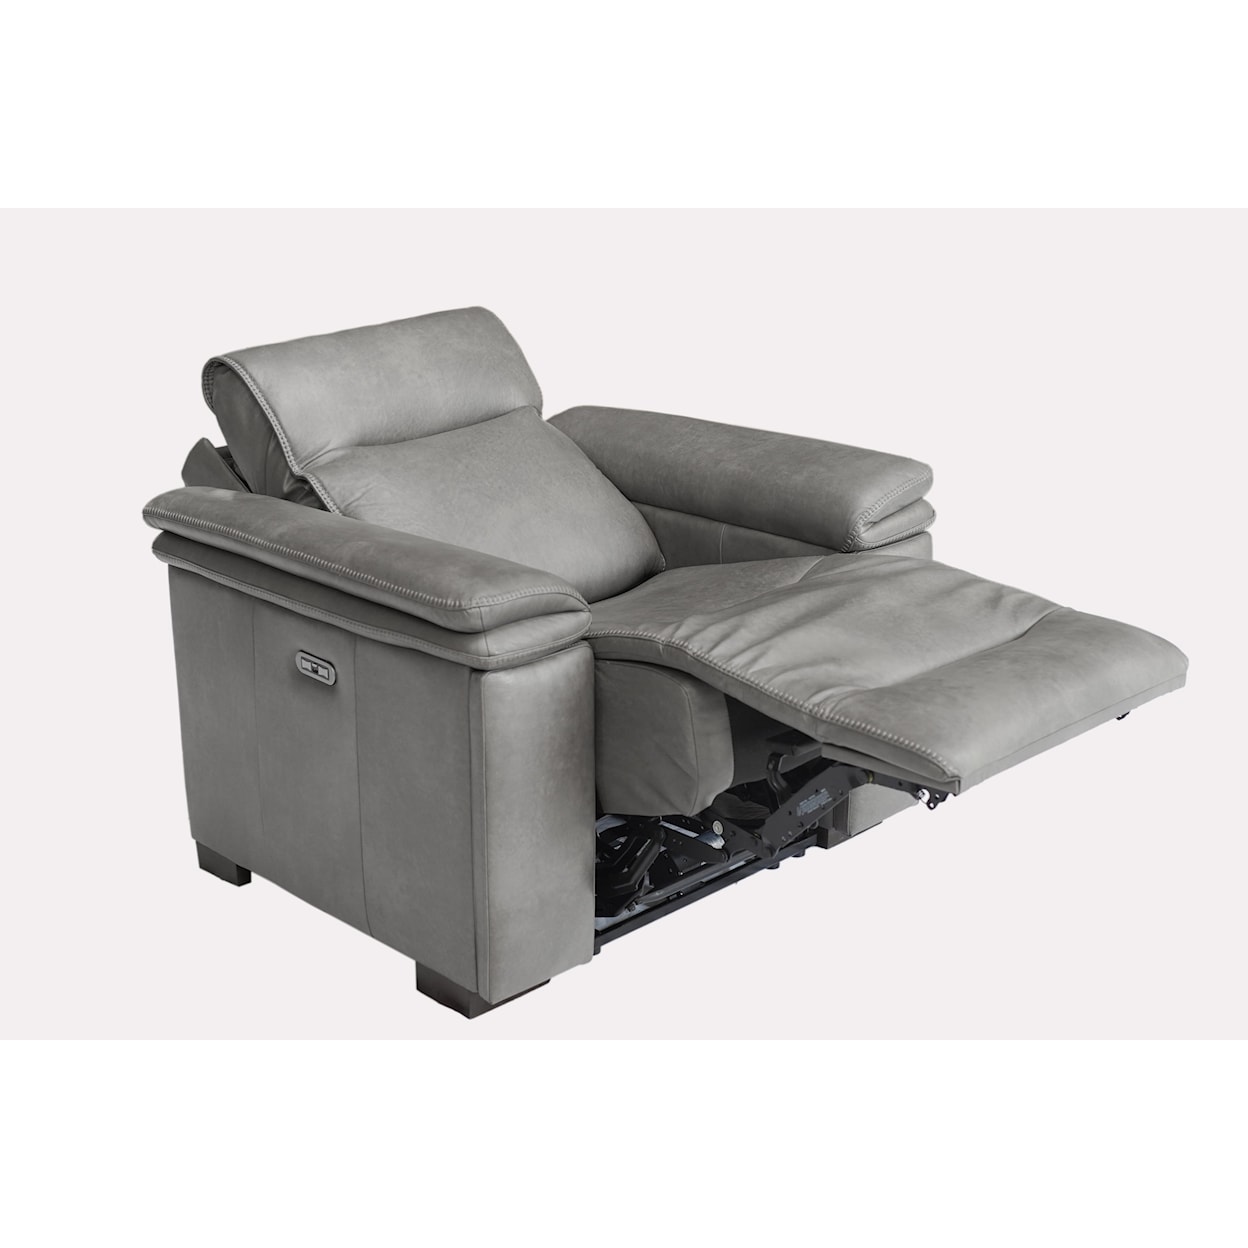 Luxfort Home New York Leather Power Recliner